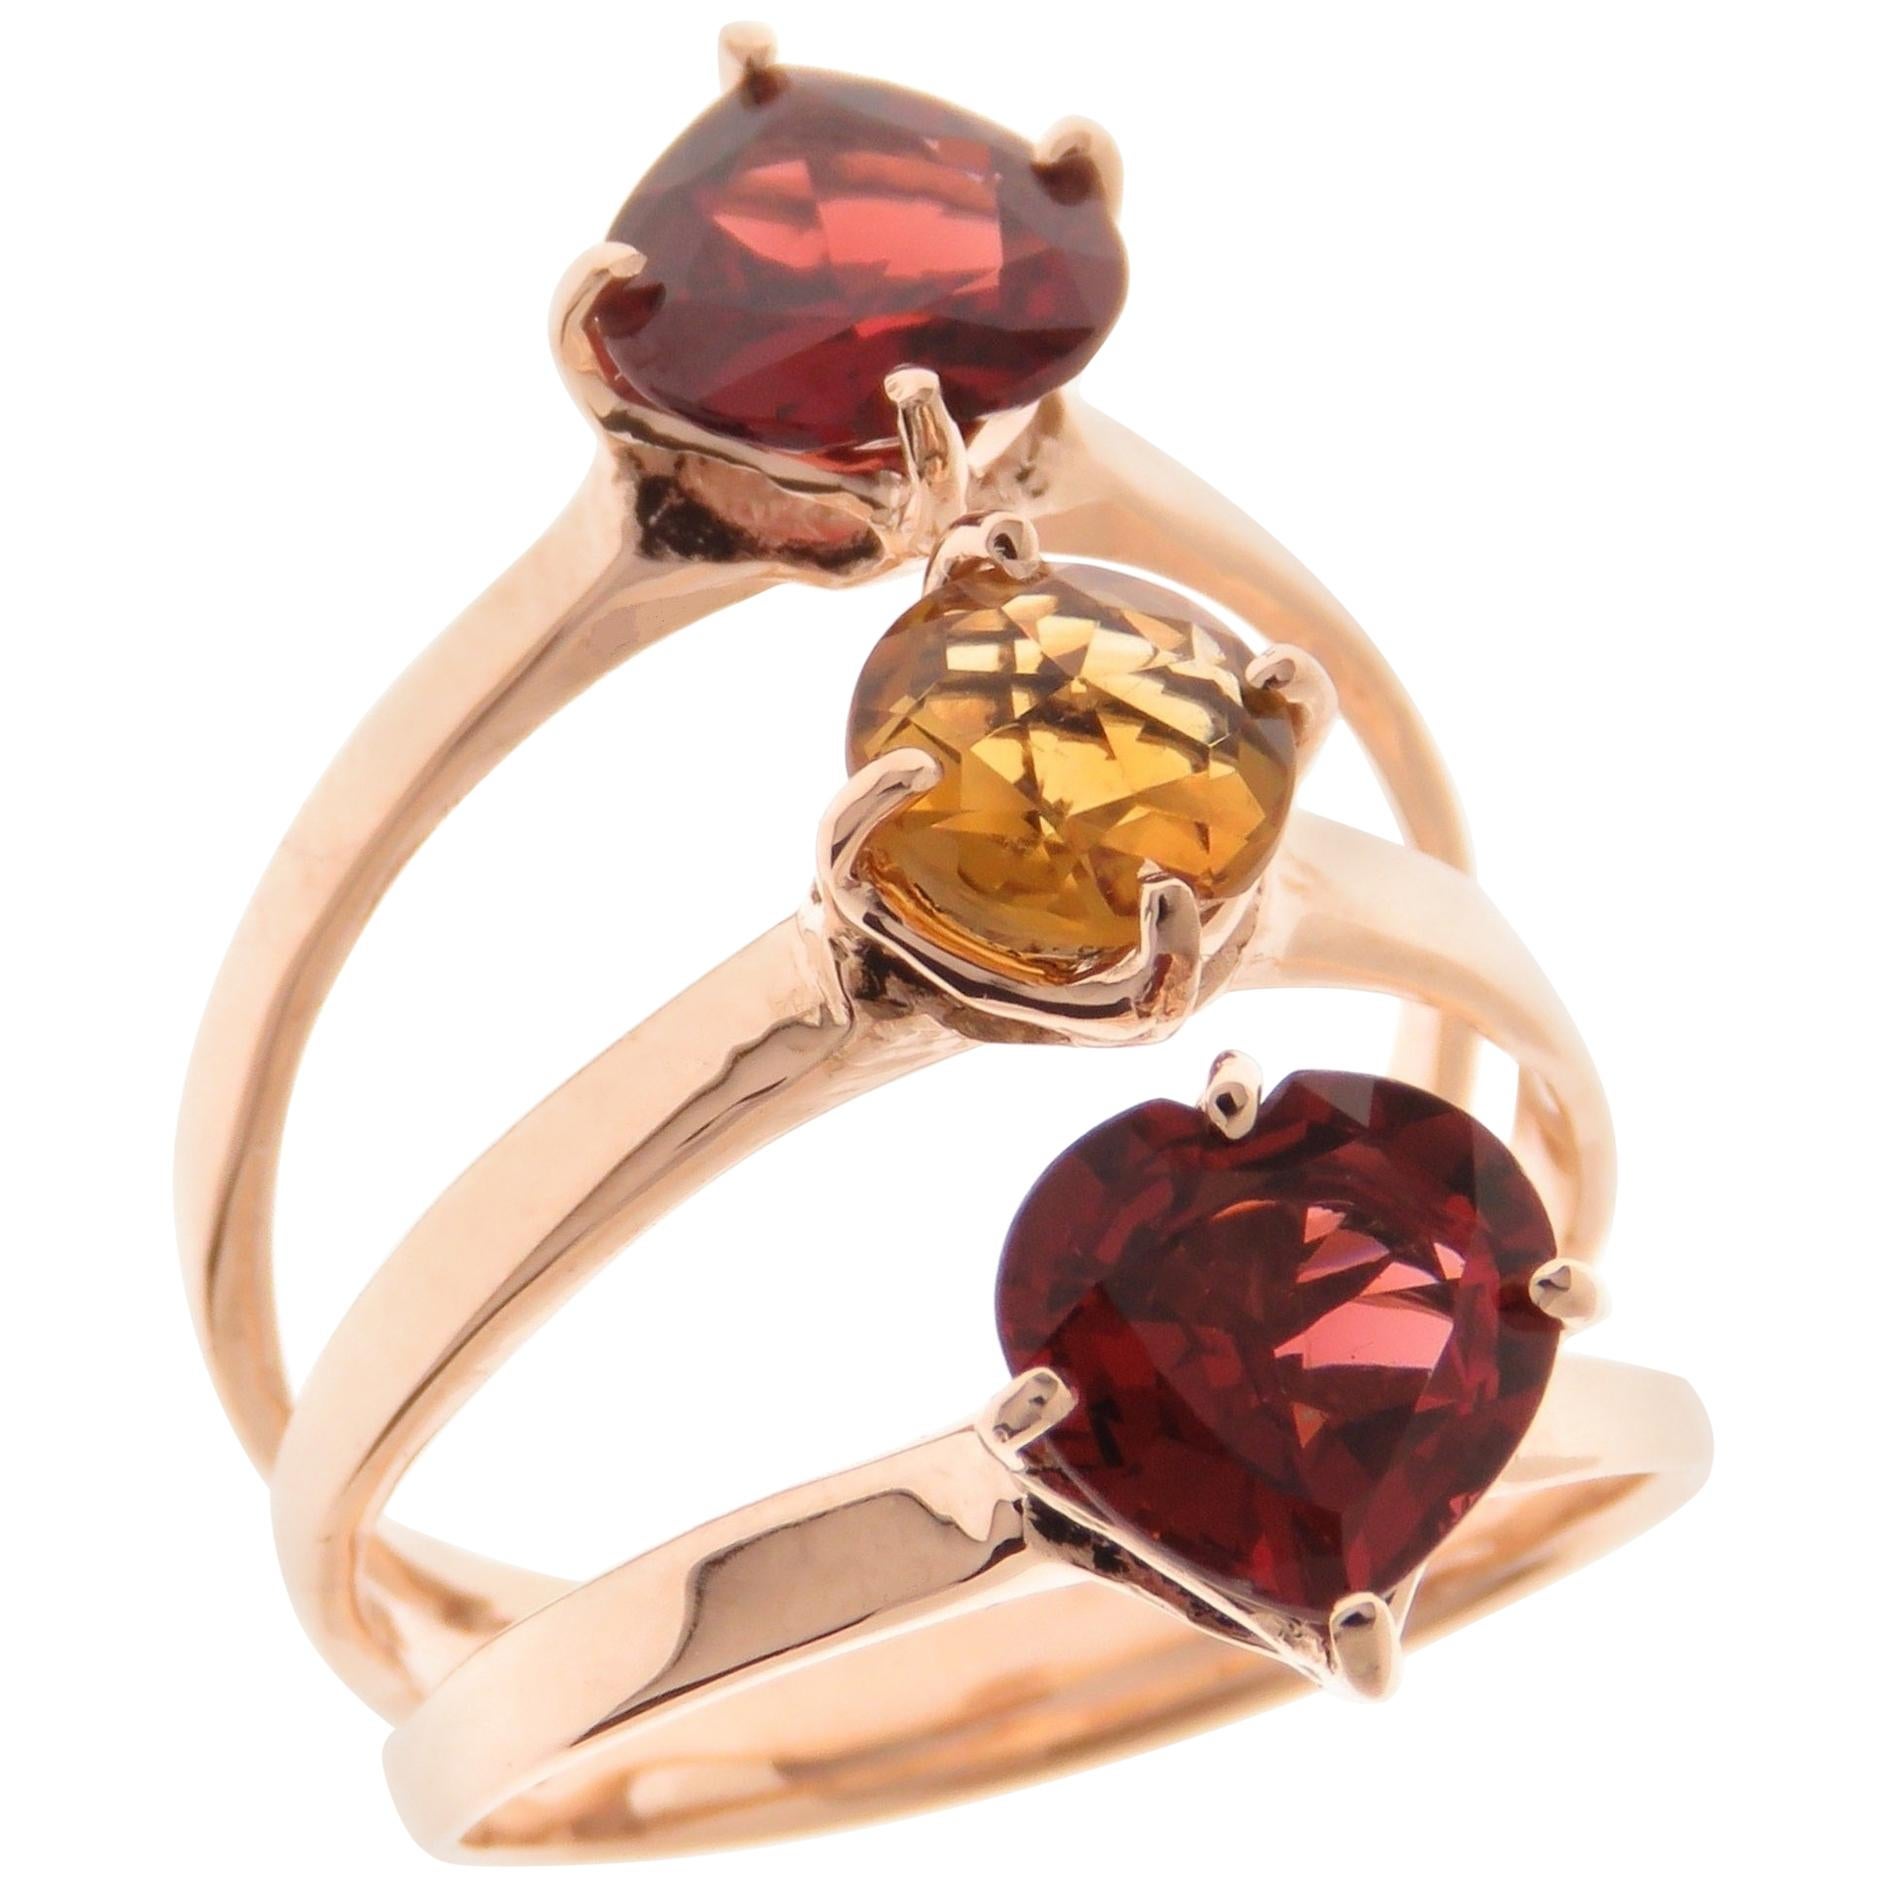 Heart Cut Garnet Rose Cut Citrine 9 Karat Rose Gold Ring Handcrafted in Italy For Sale